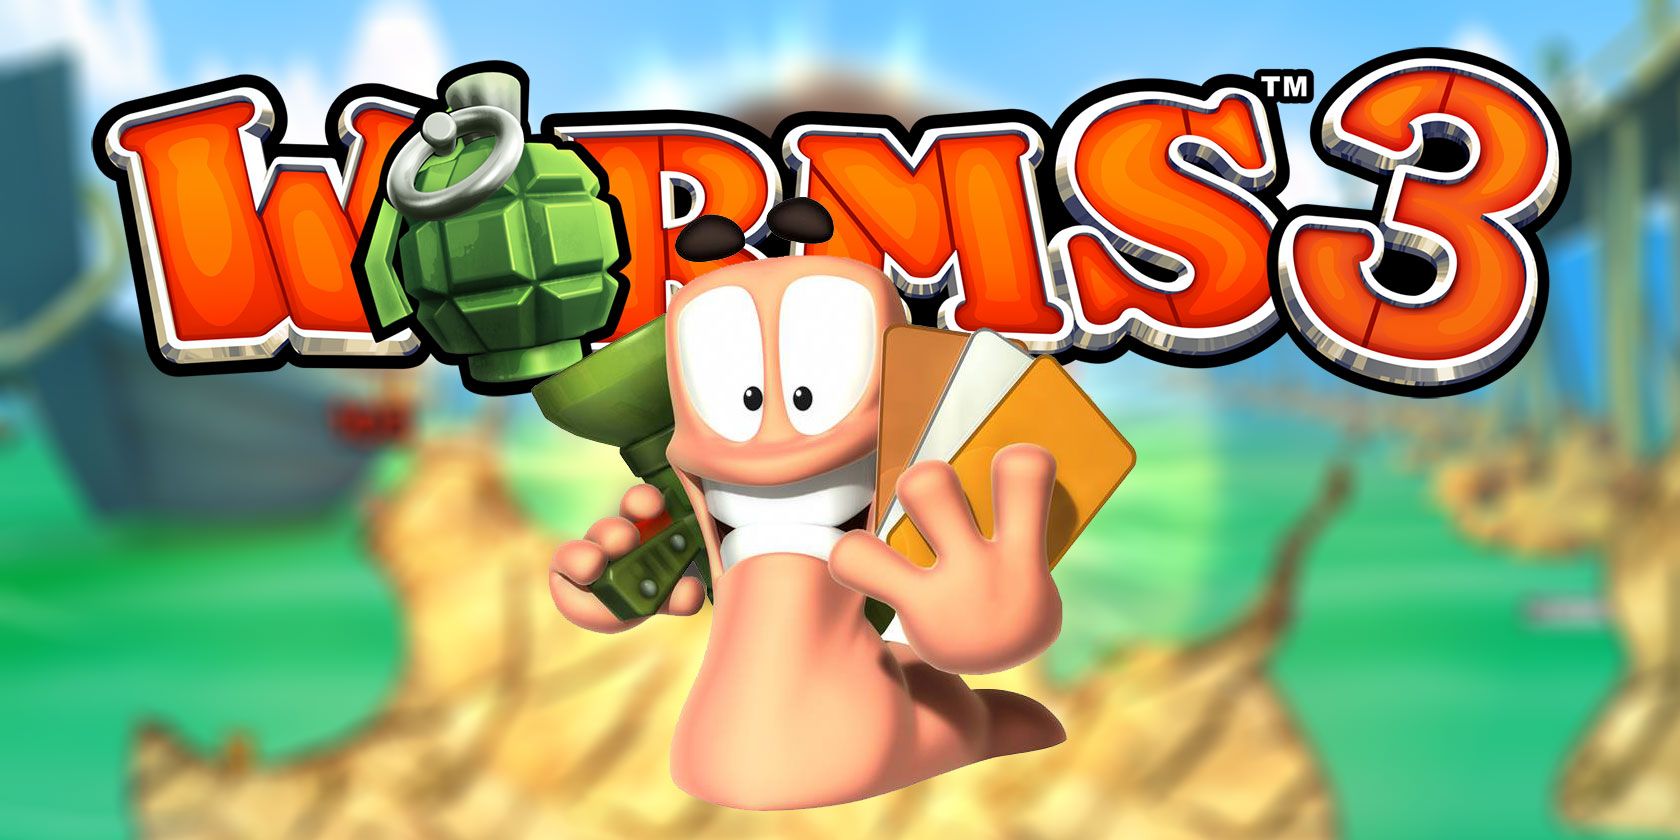 worms3-featured-makeuseof.jpg